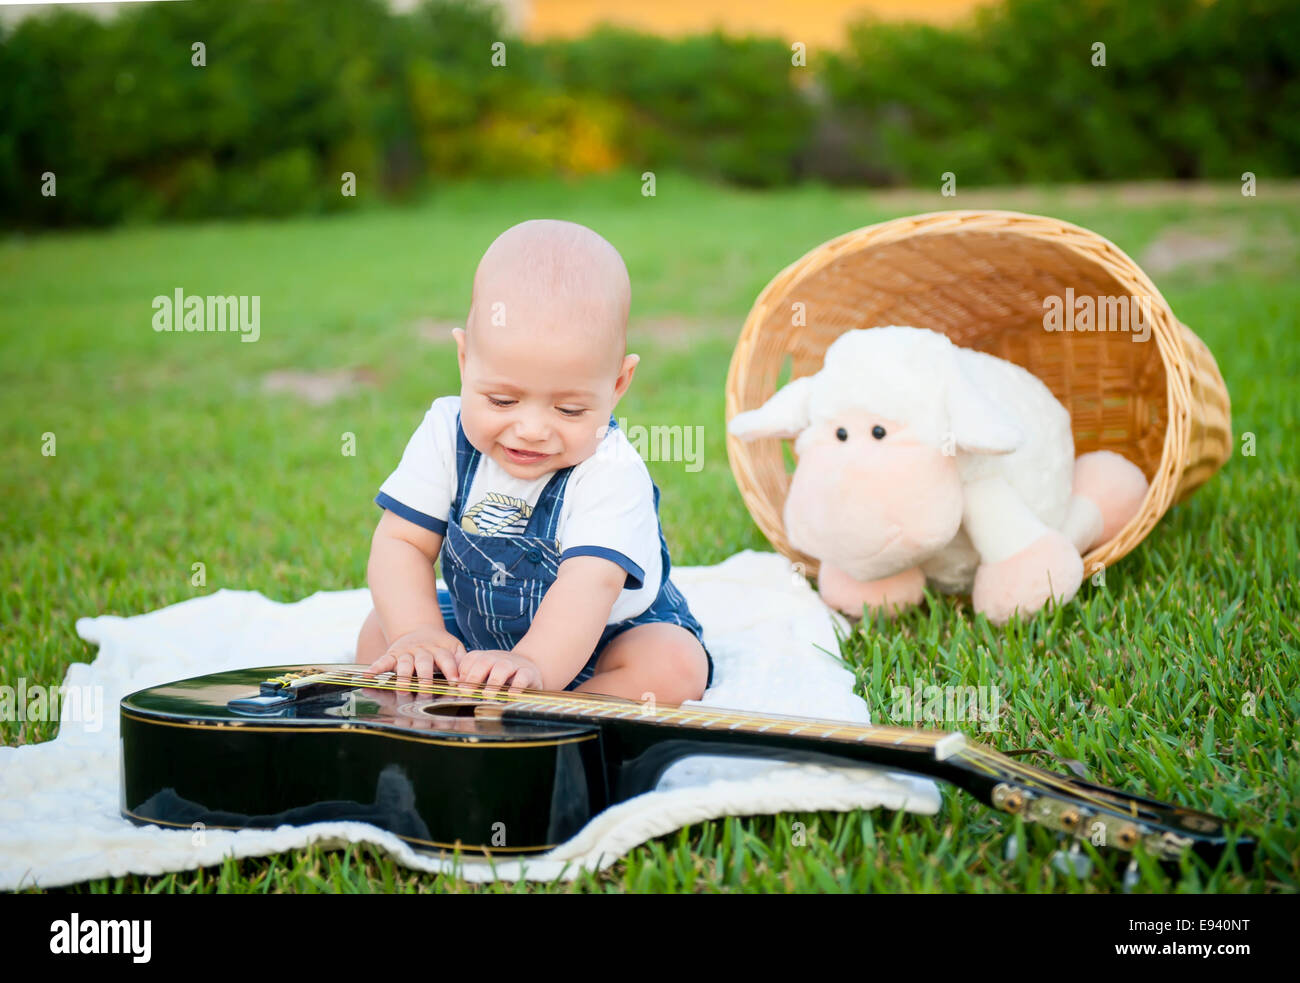 The little boy with a guitar on the grass Stock Photo